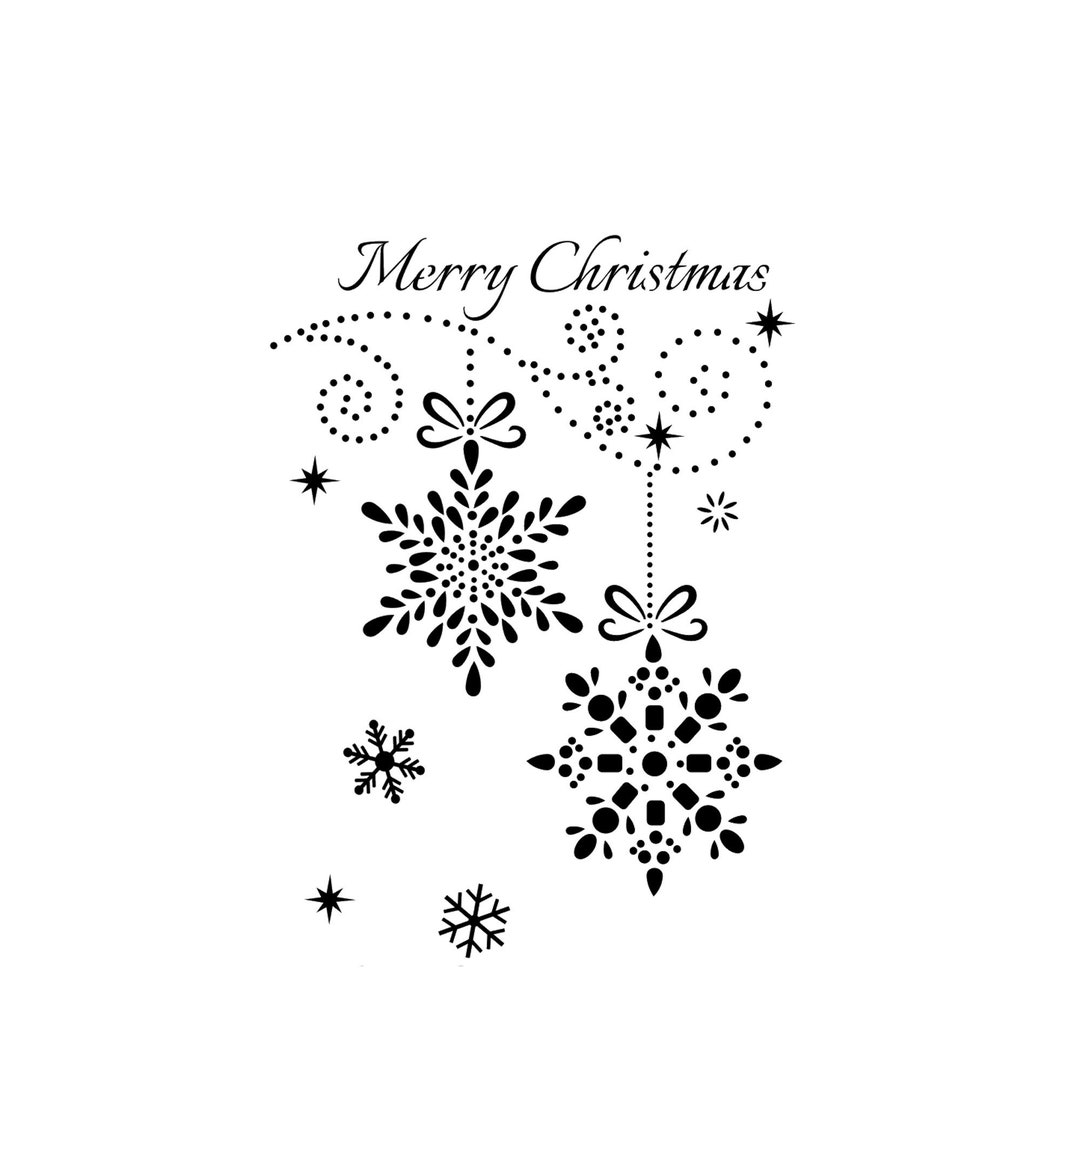 Merry Christmas - Black and white Bath Towel by Stefano Senise - Pixels